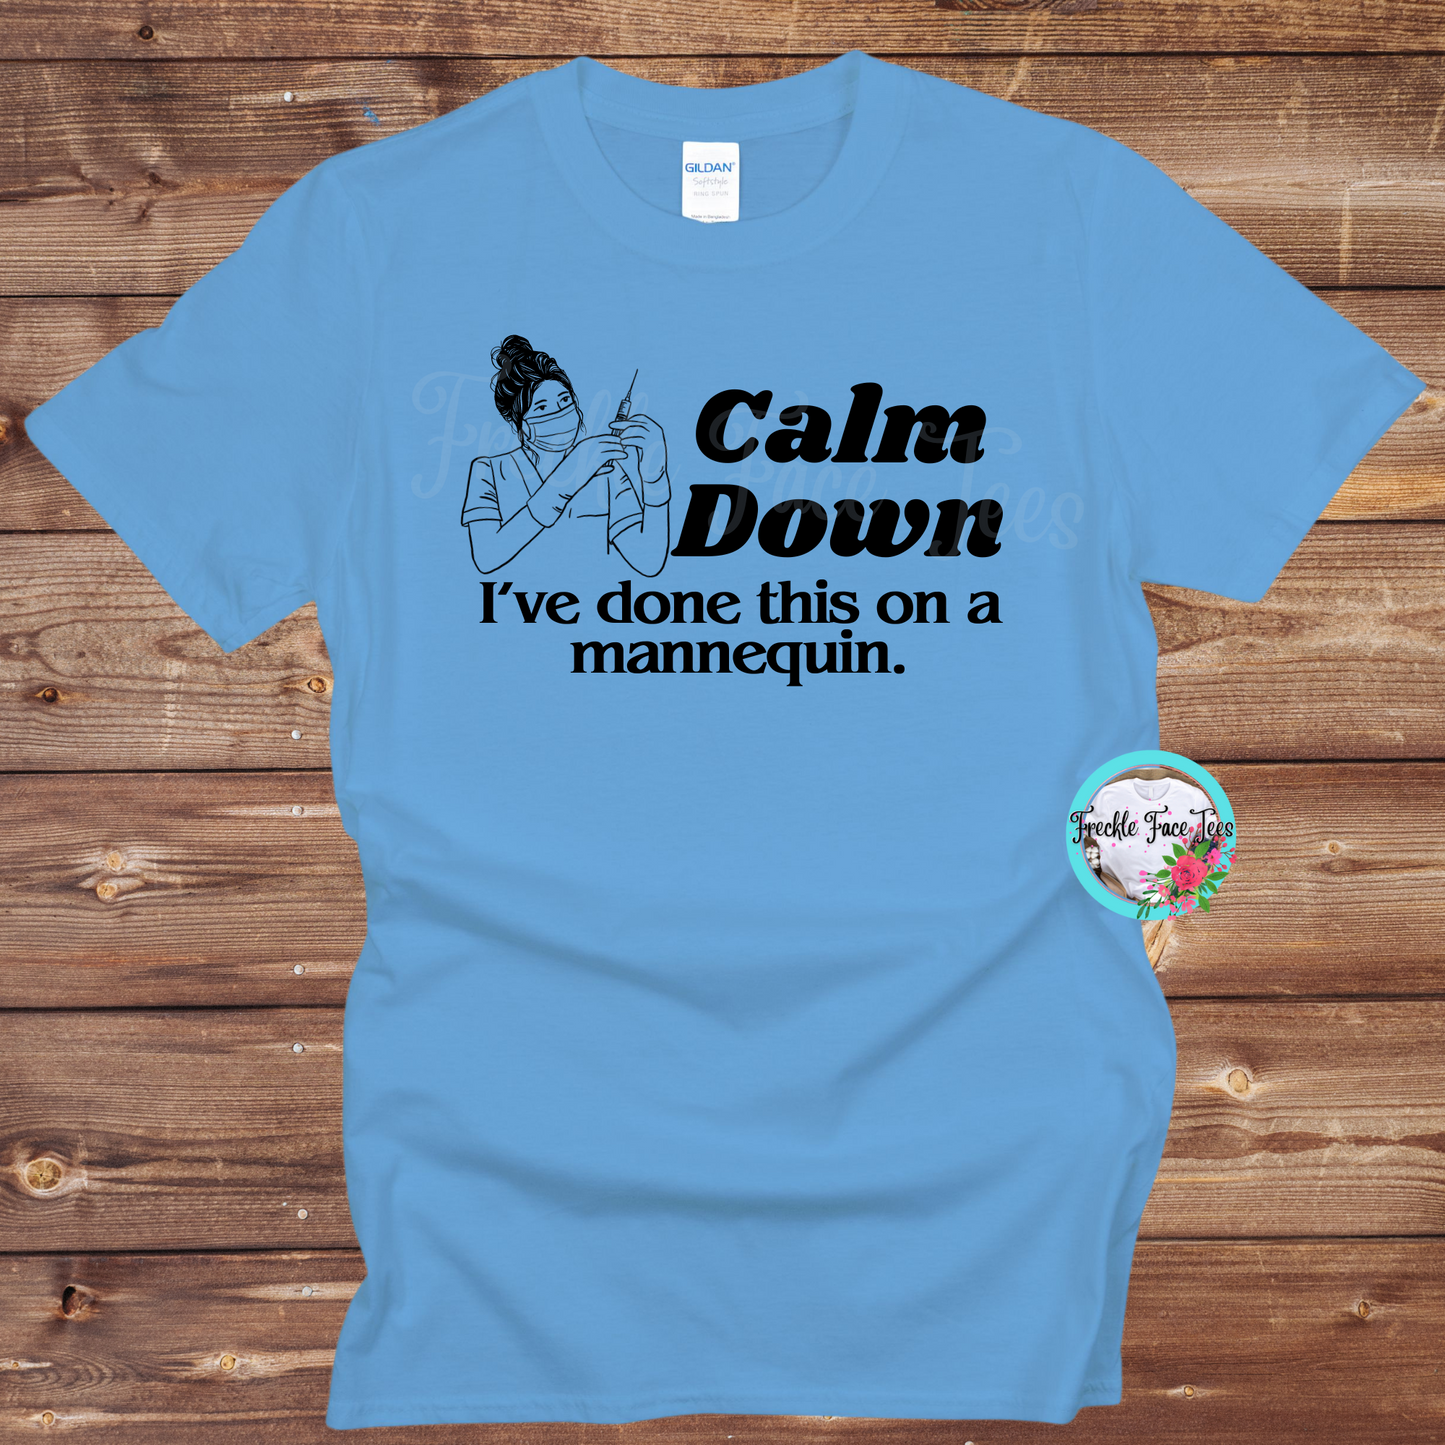 Calm Down I've done this on a mannequin. Nurse shirt